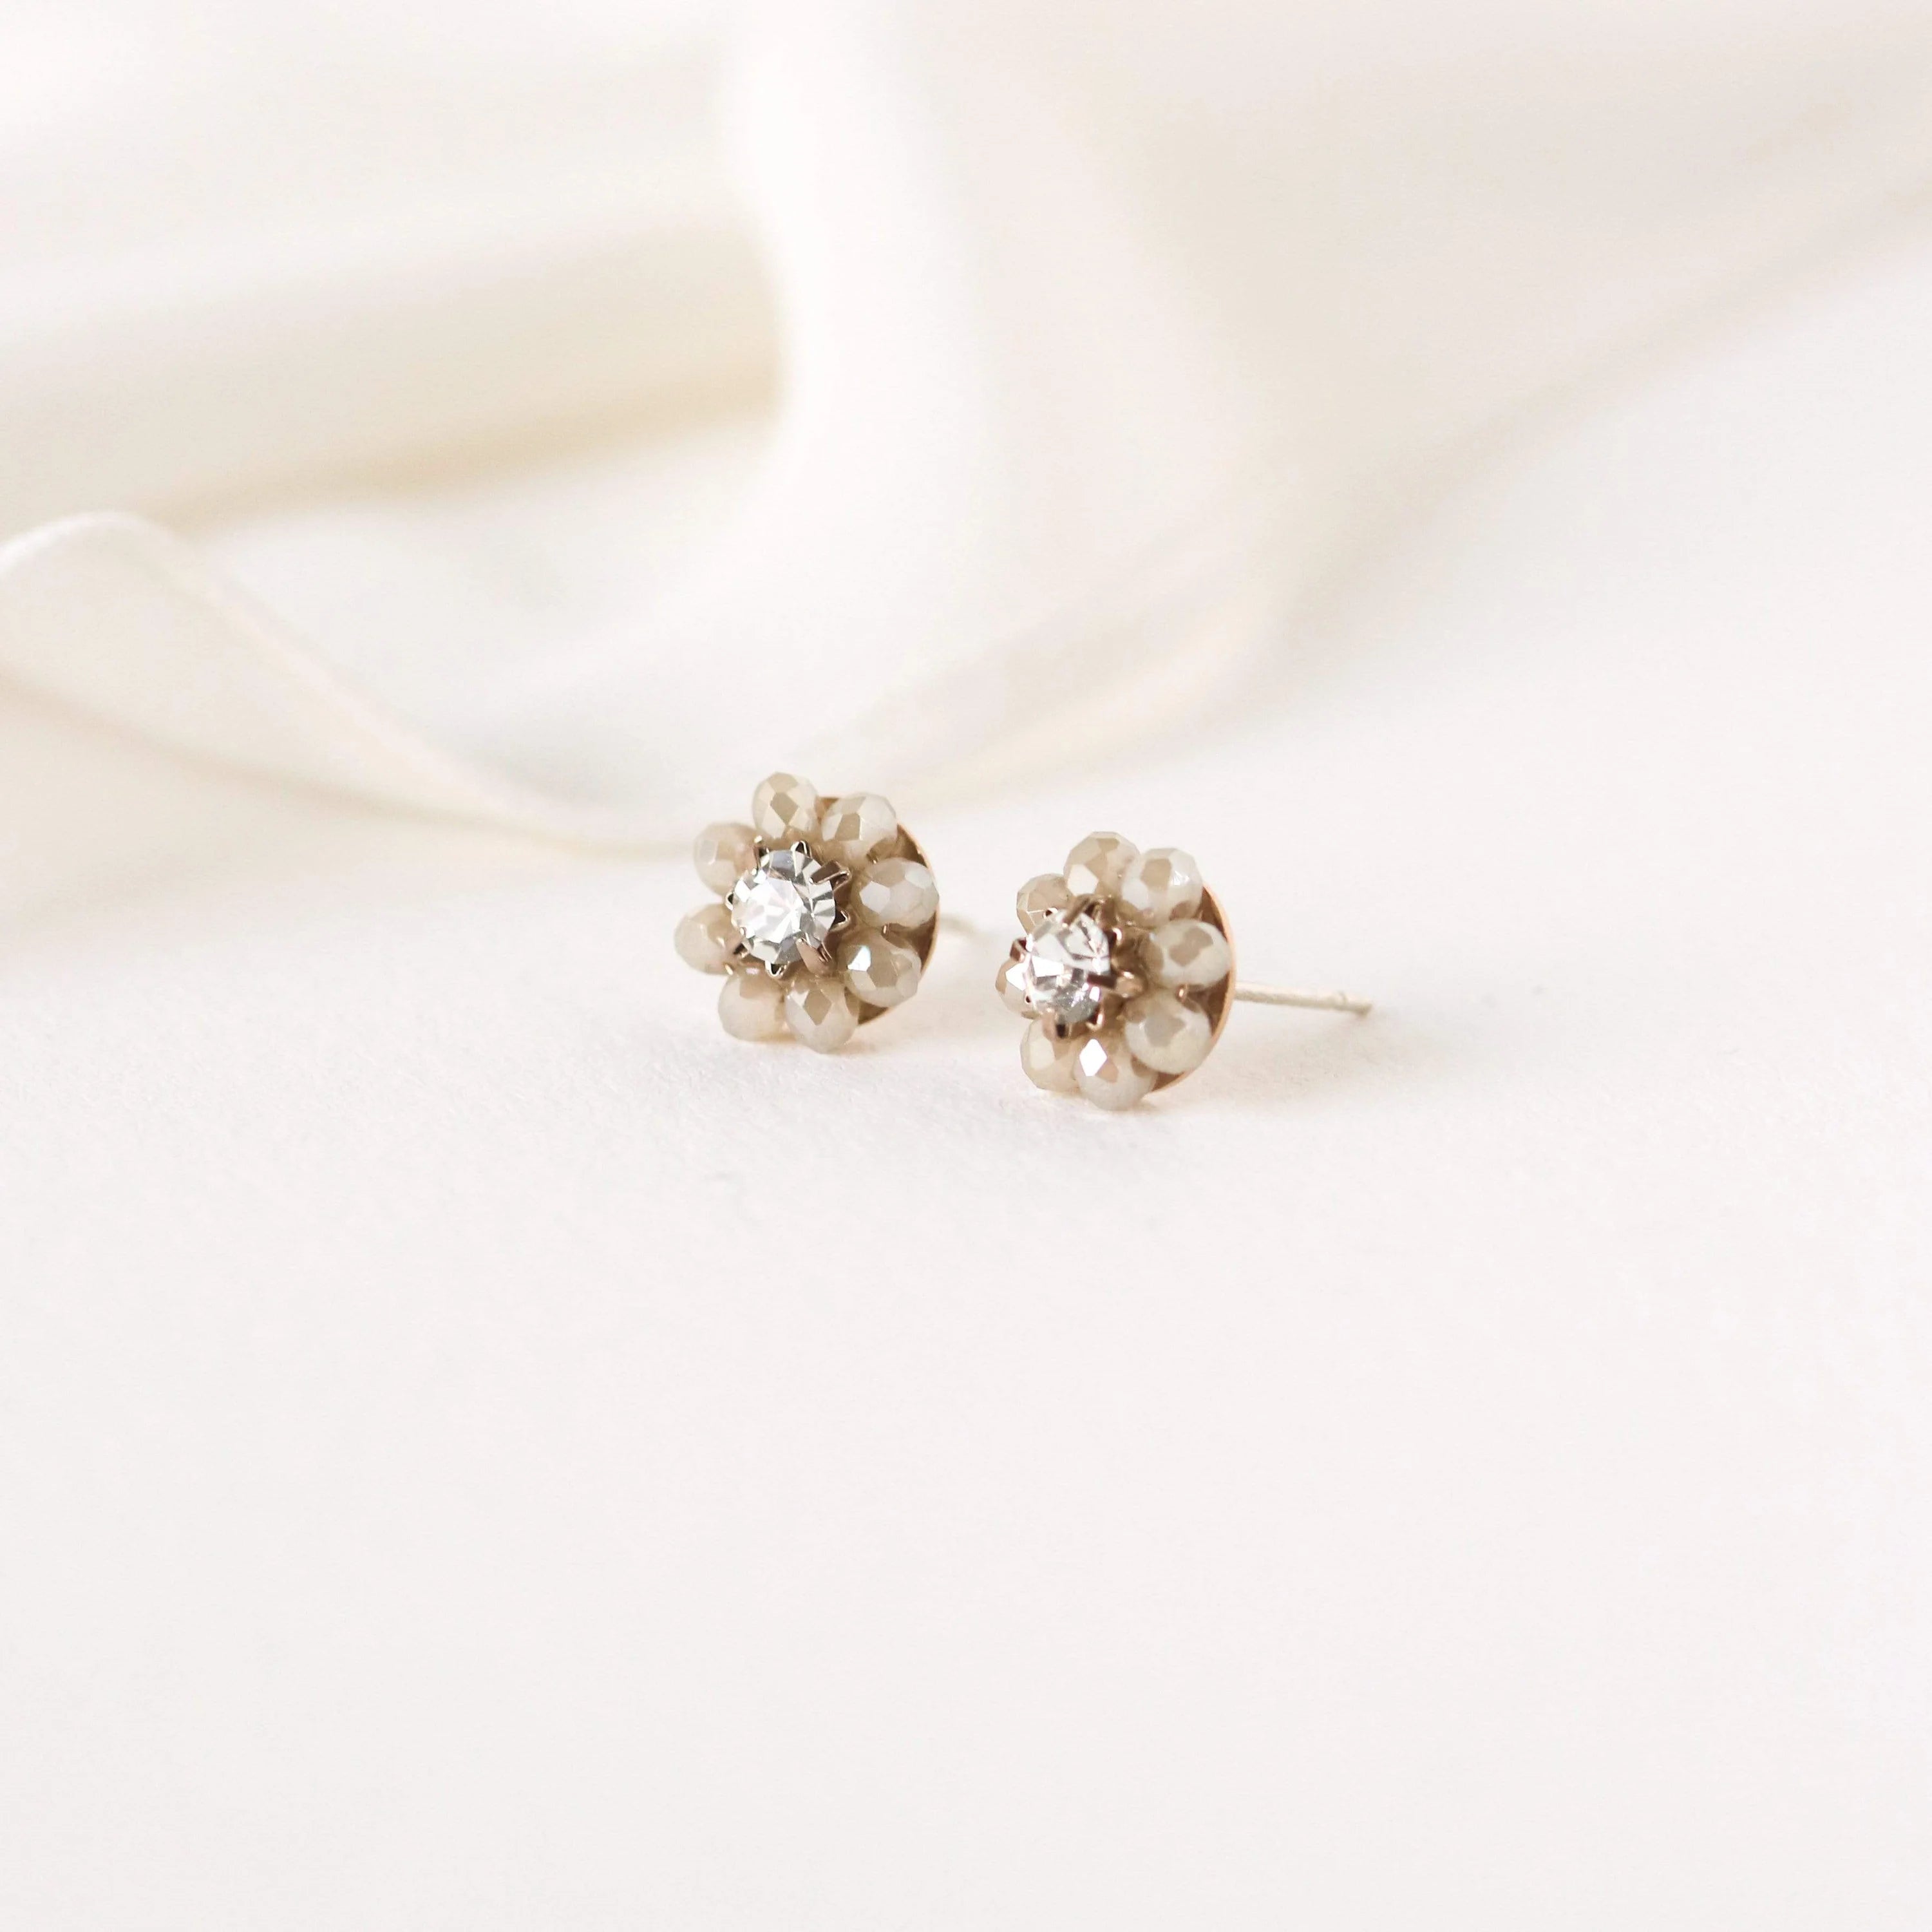 Forget Me Not Stud Earrings: Creme